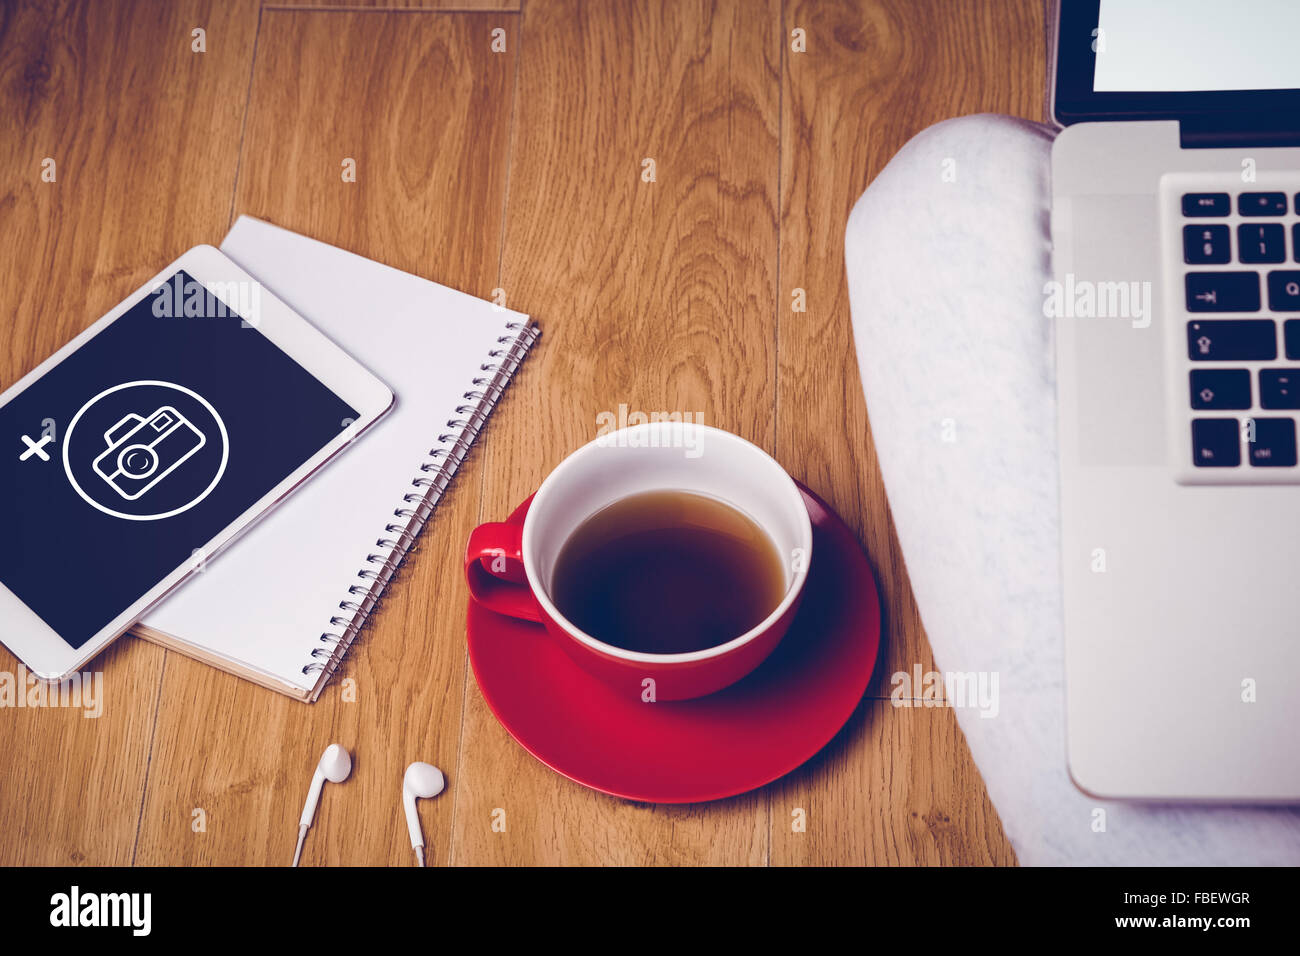 Composite image of overhead shot of laptop, tablet, coffee and headphones Stock Photo